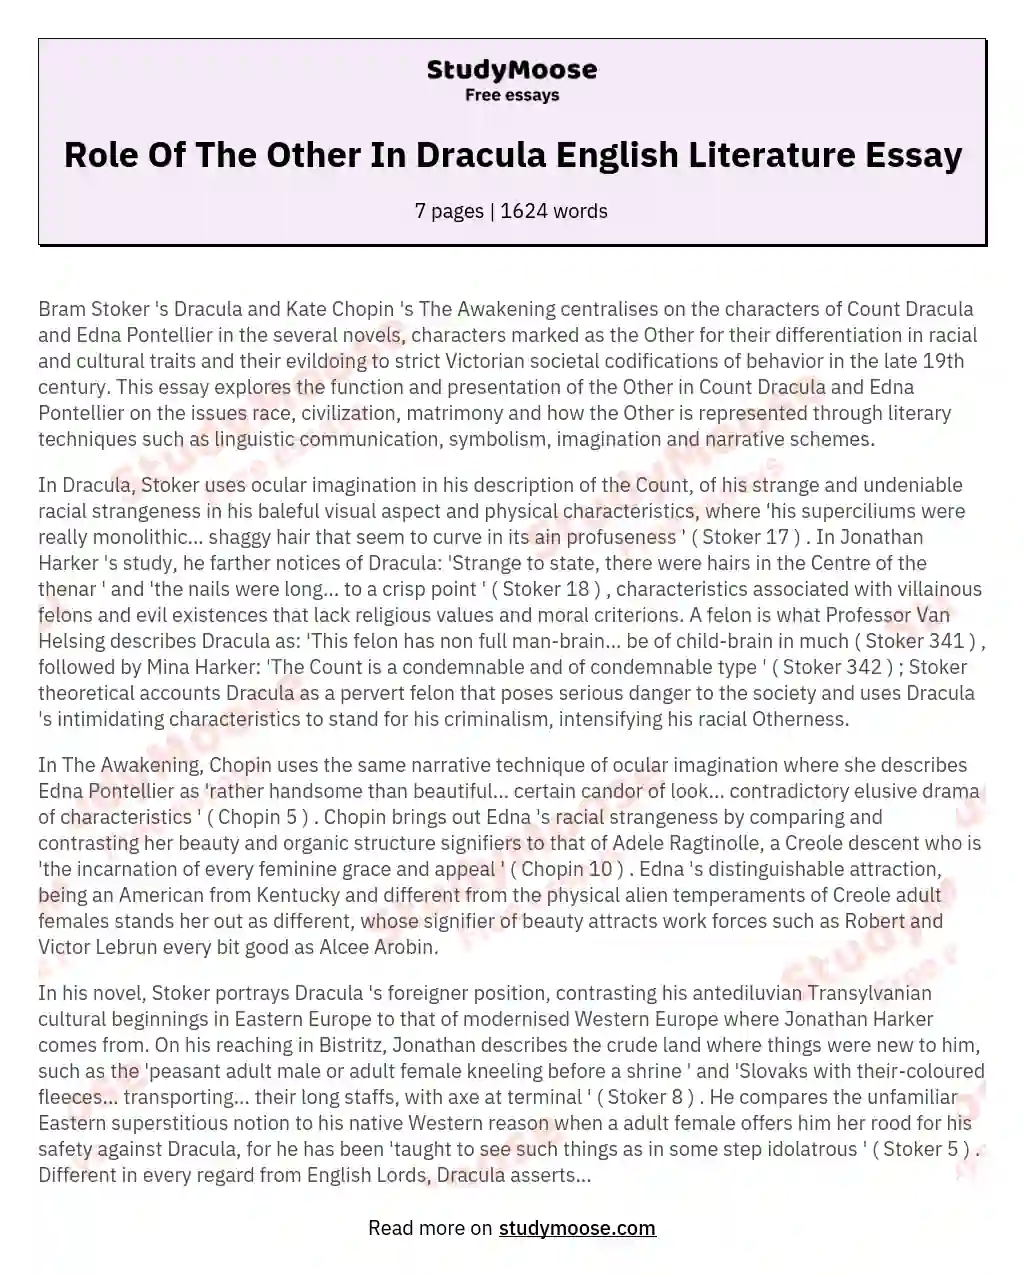 Role Of The Other In Dracula English Literature Essay essay